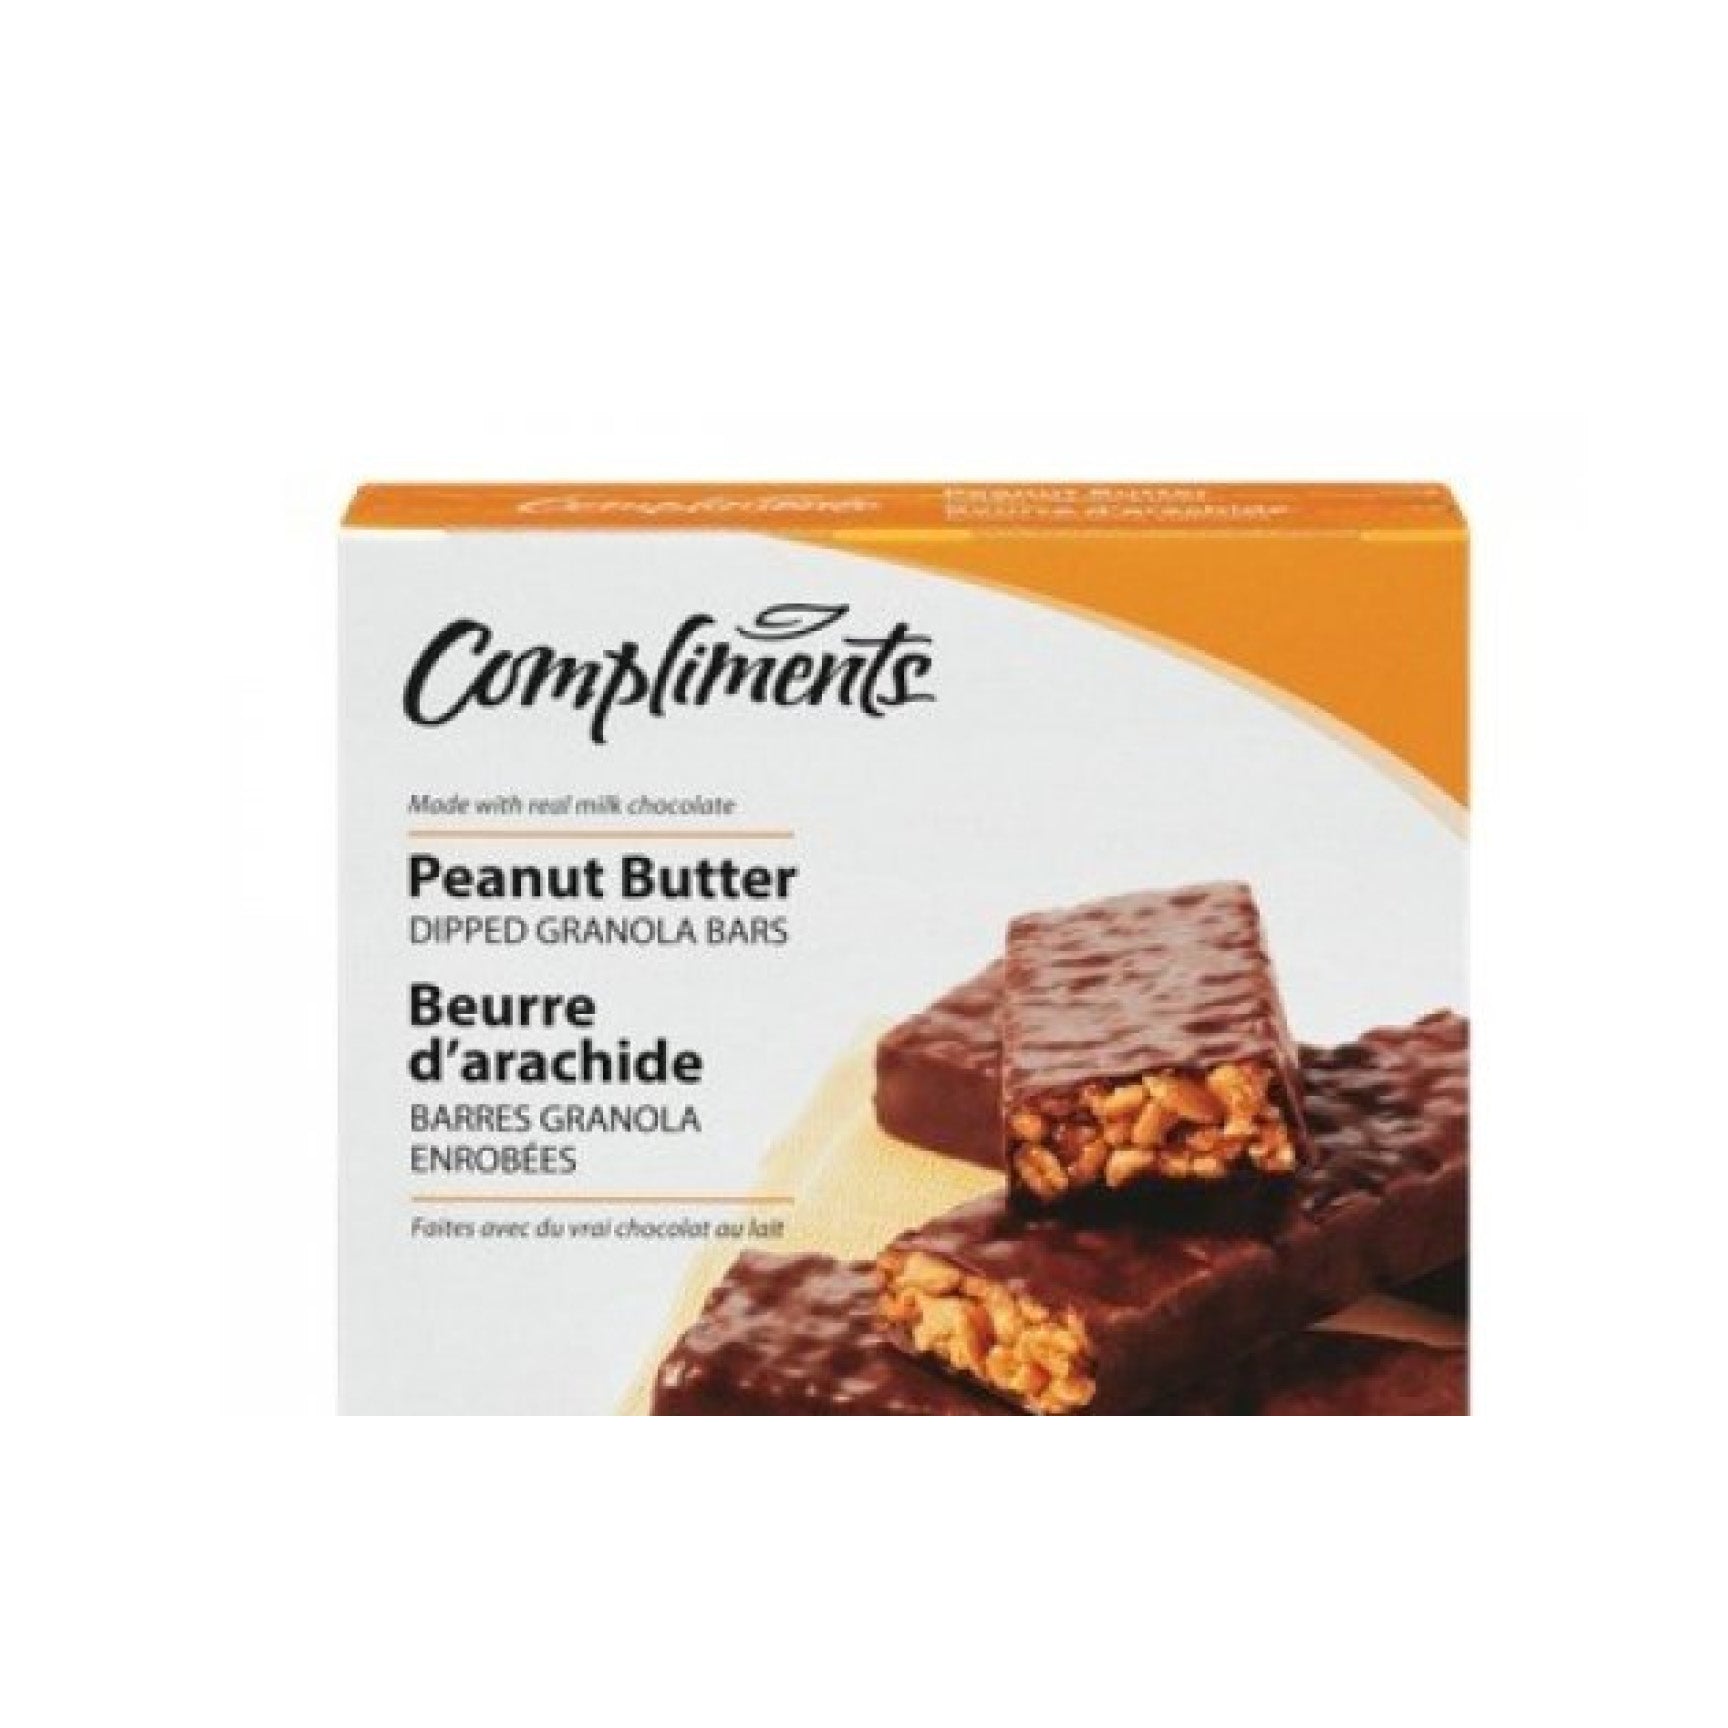 Compliments Dipped Peanut Butter Granola Bars, 5pk, 156g